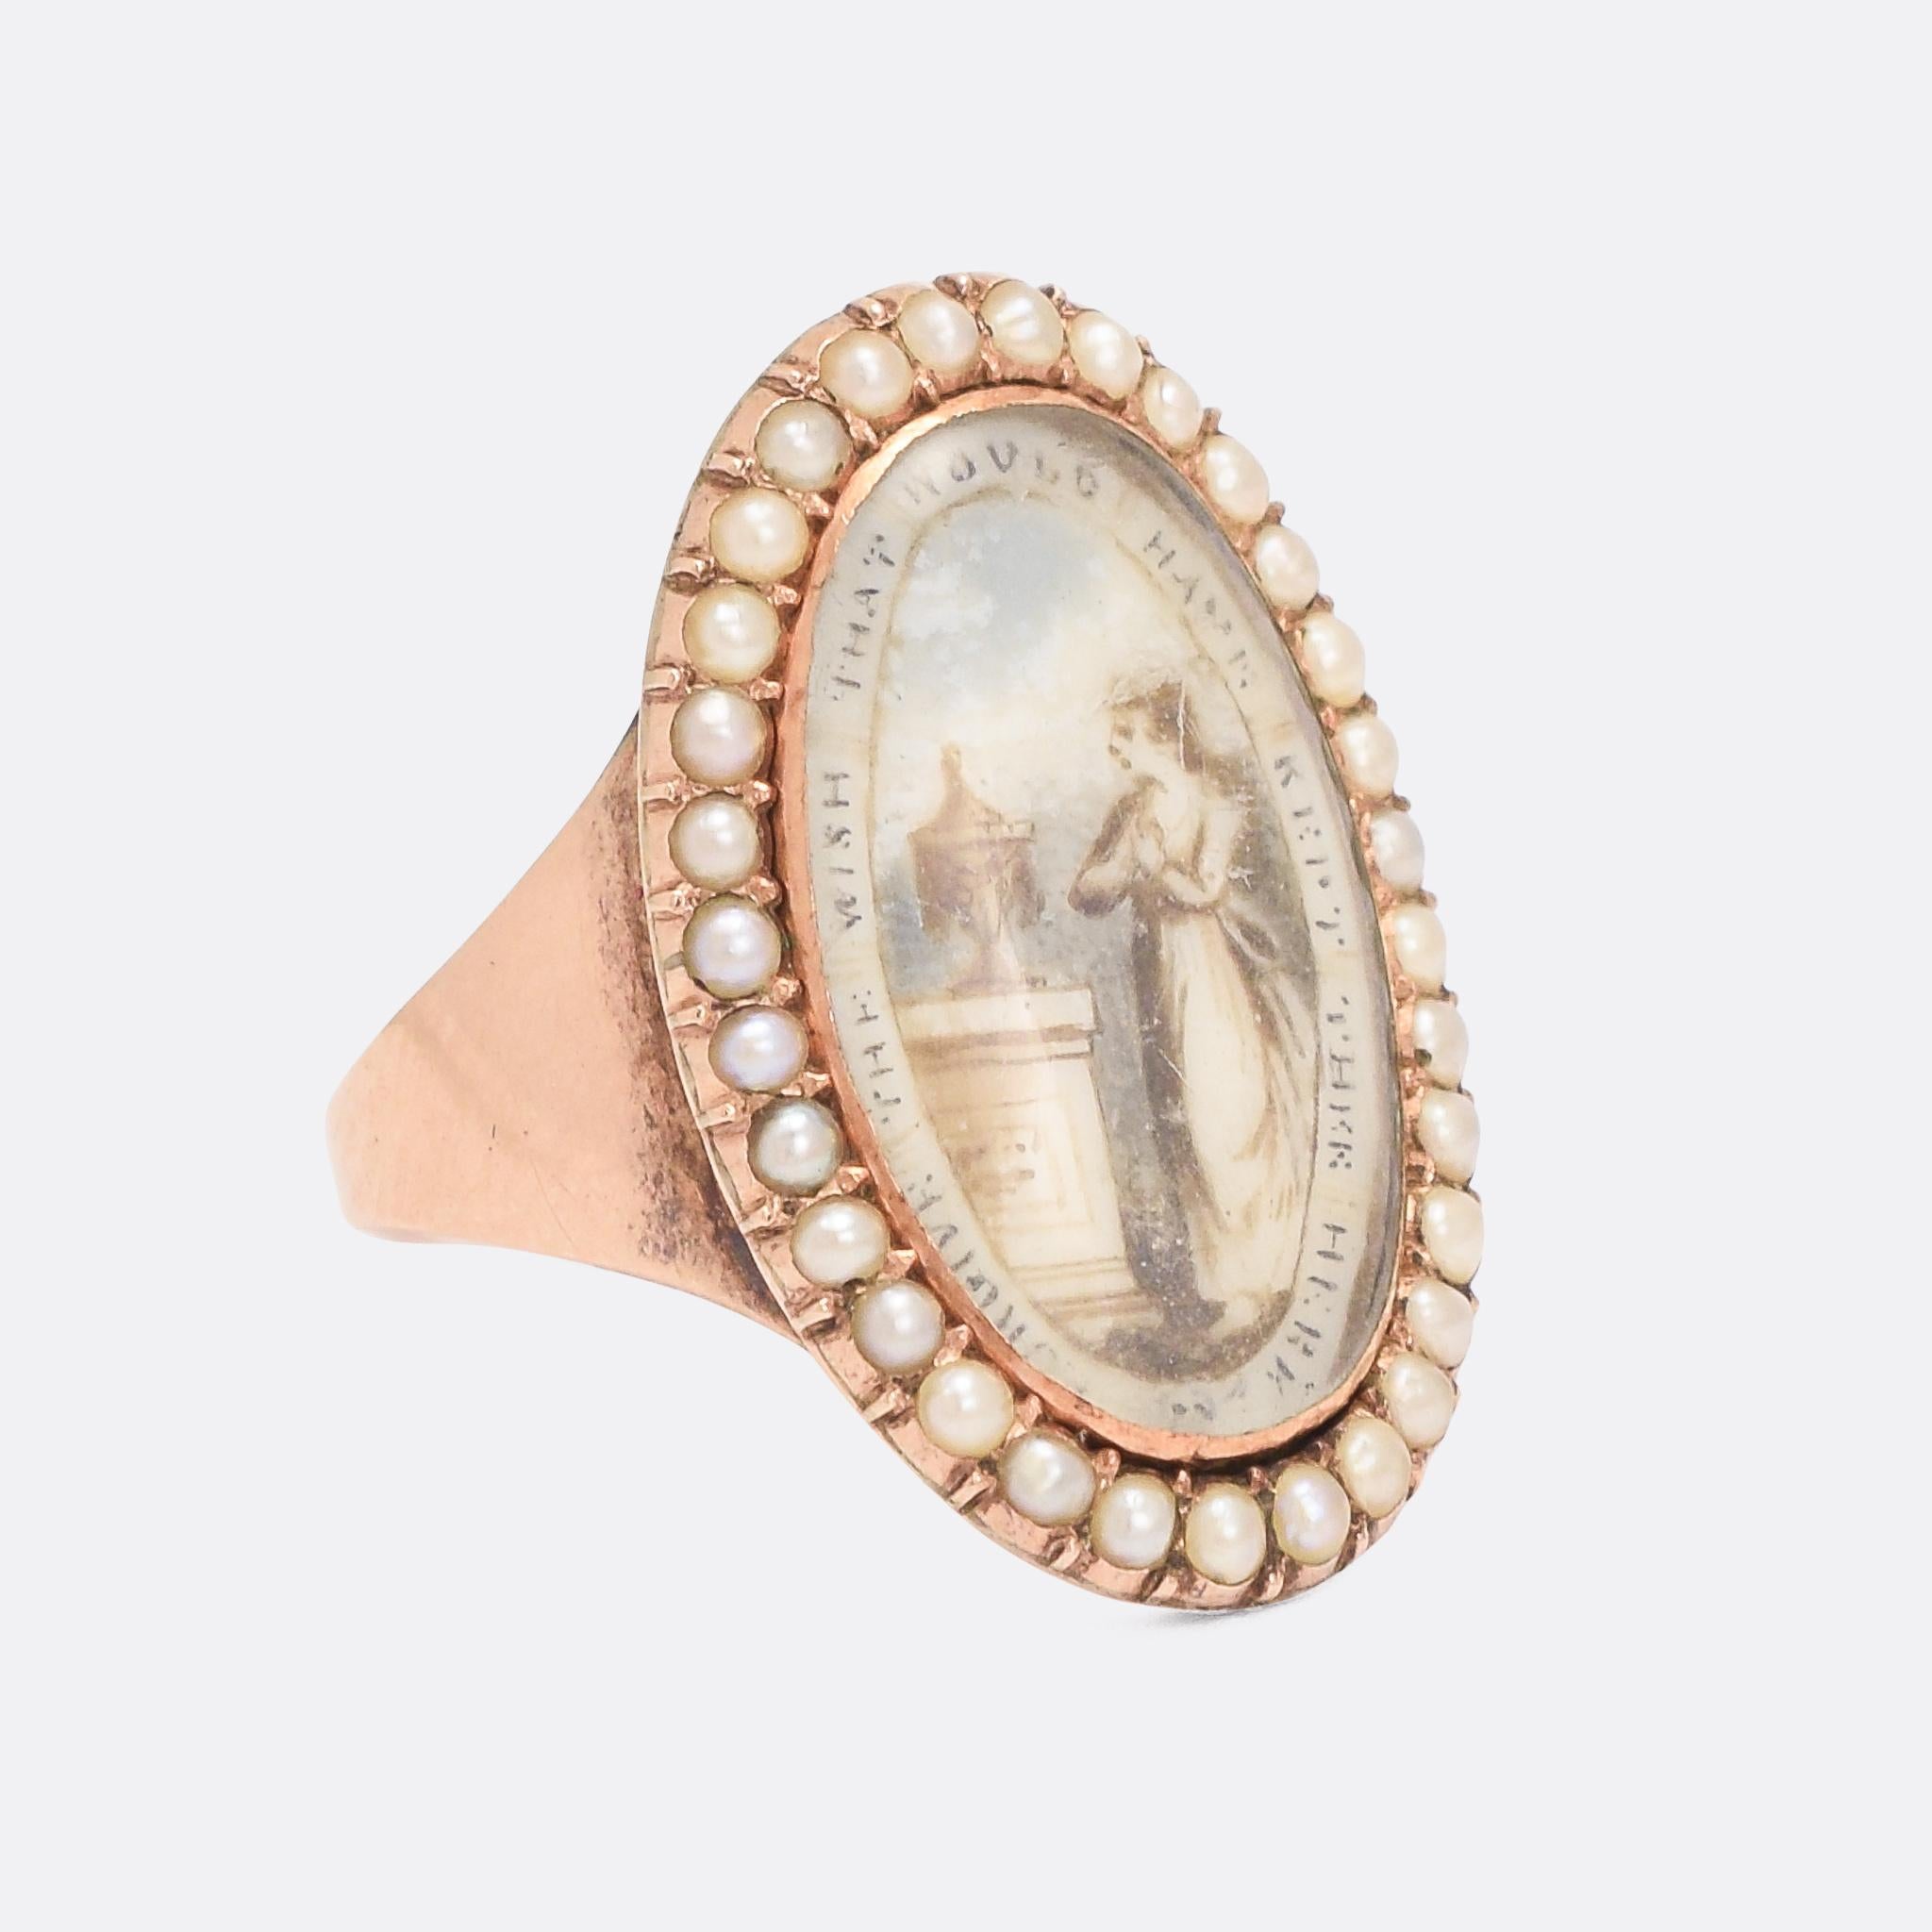 An incredible antique navette memorial ring with a finely painted oval panel set within a halo of seed pearls. The panel depicts a lady in mourning, stood by a plinth and urn, with the words 